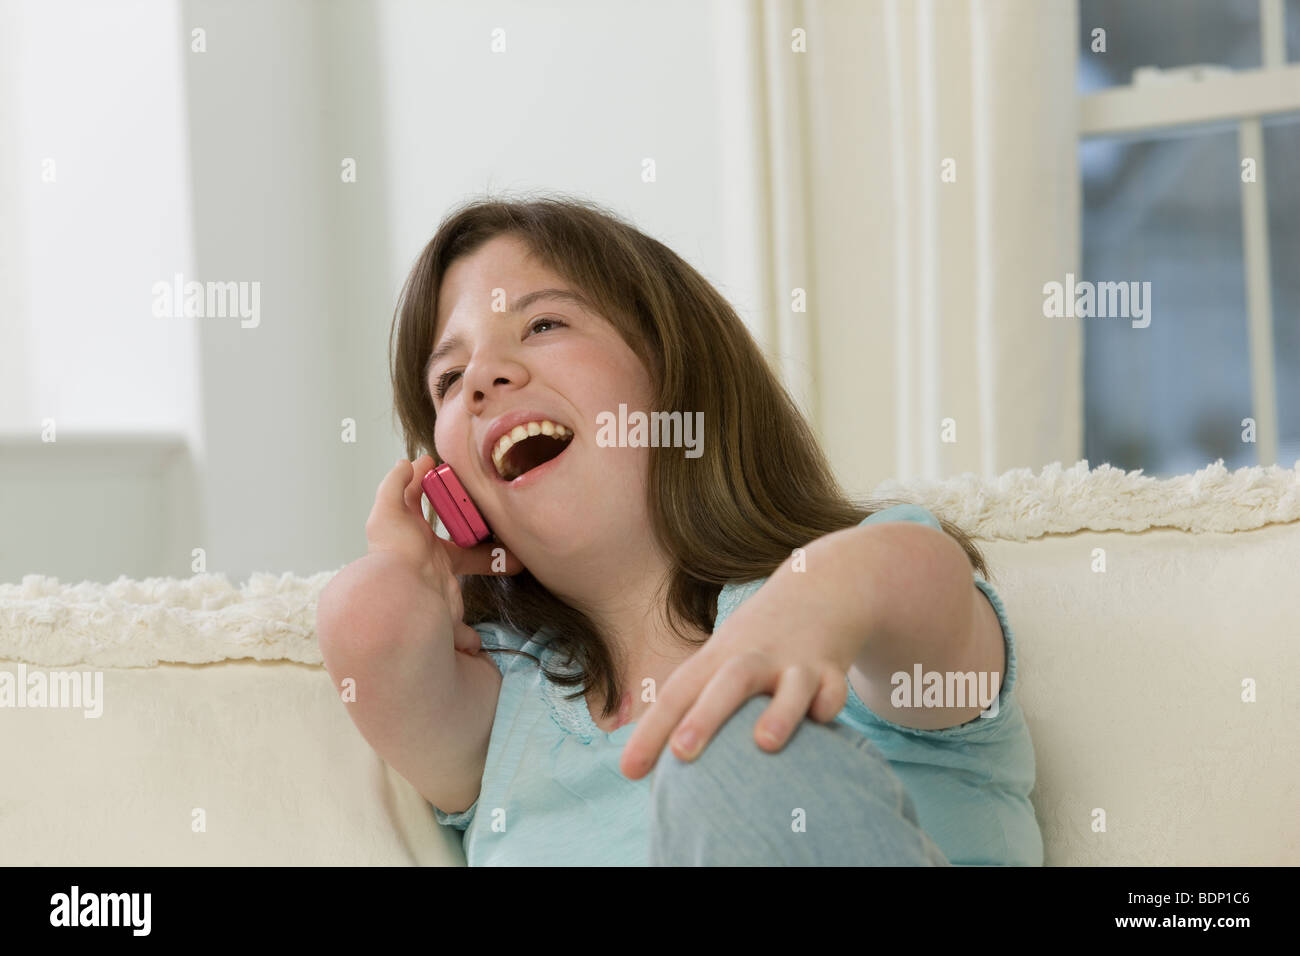 Teenage girl talking on a mobile phone Banque D'Images